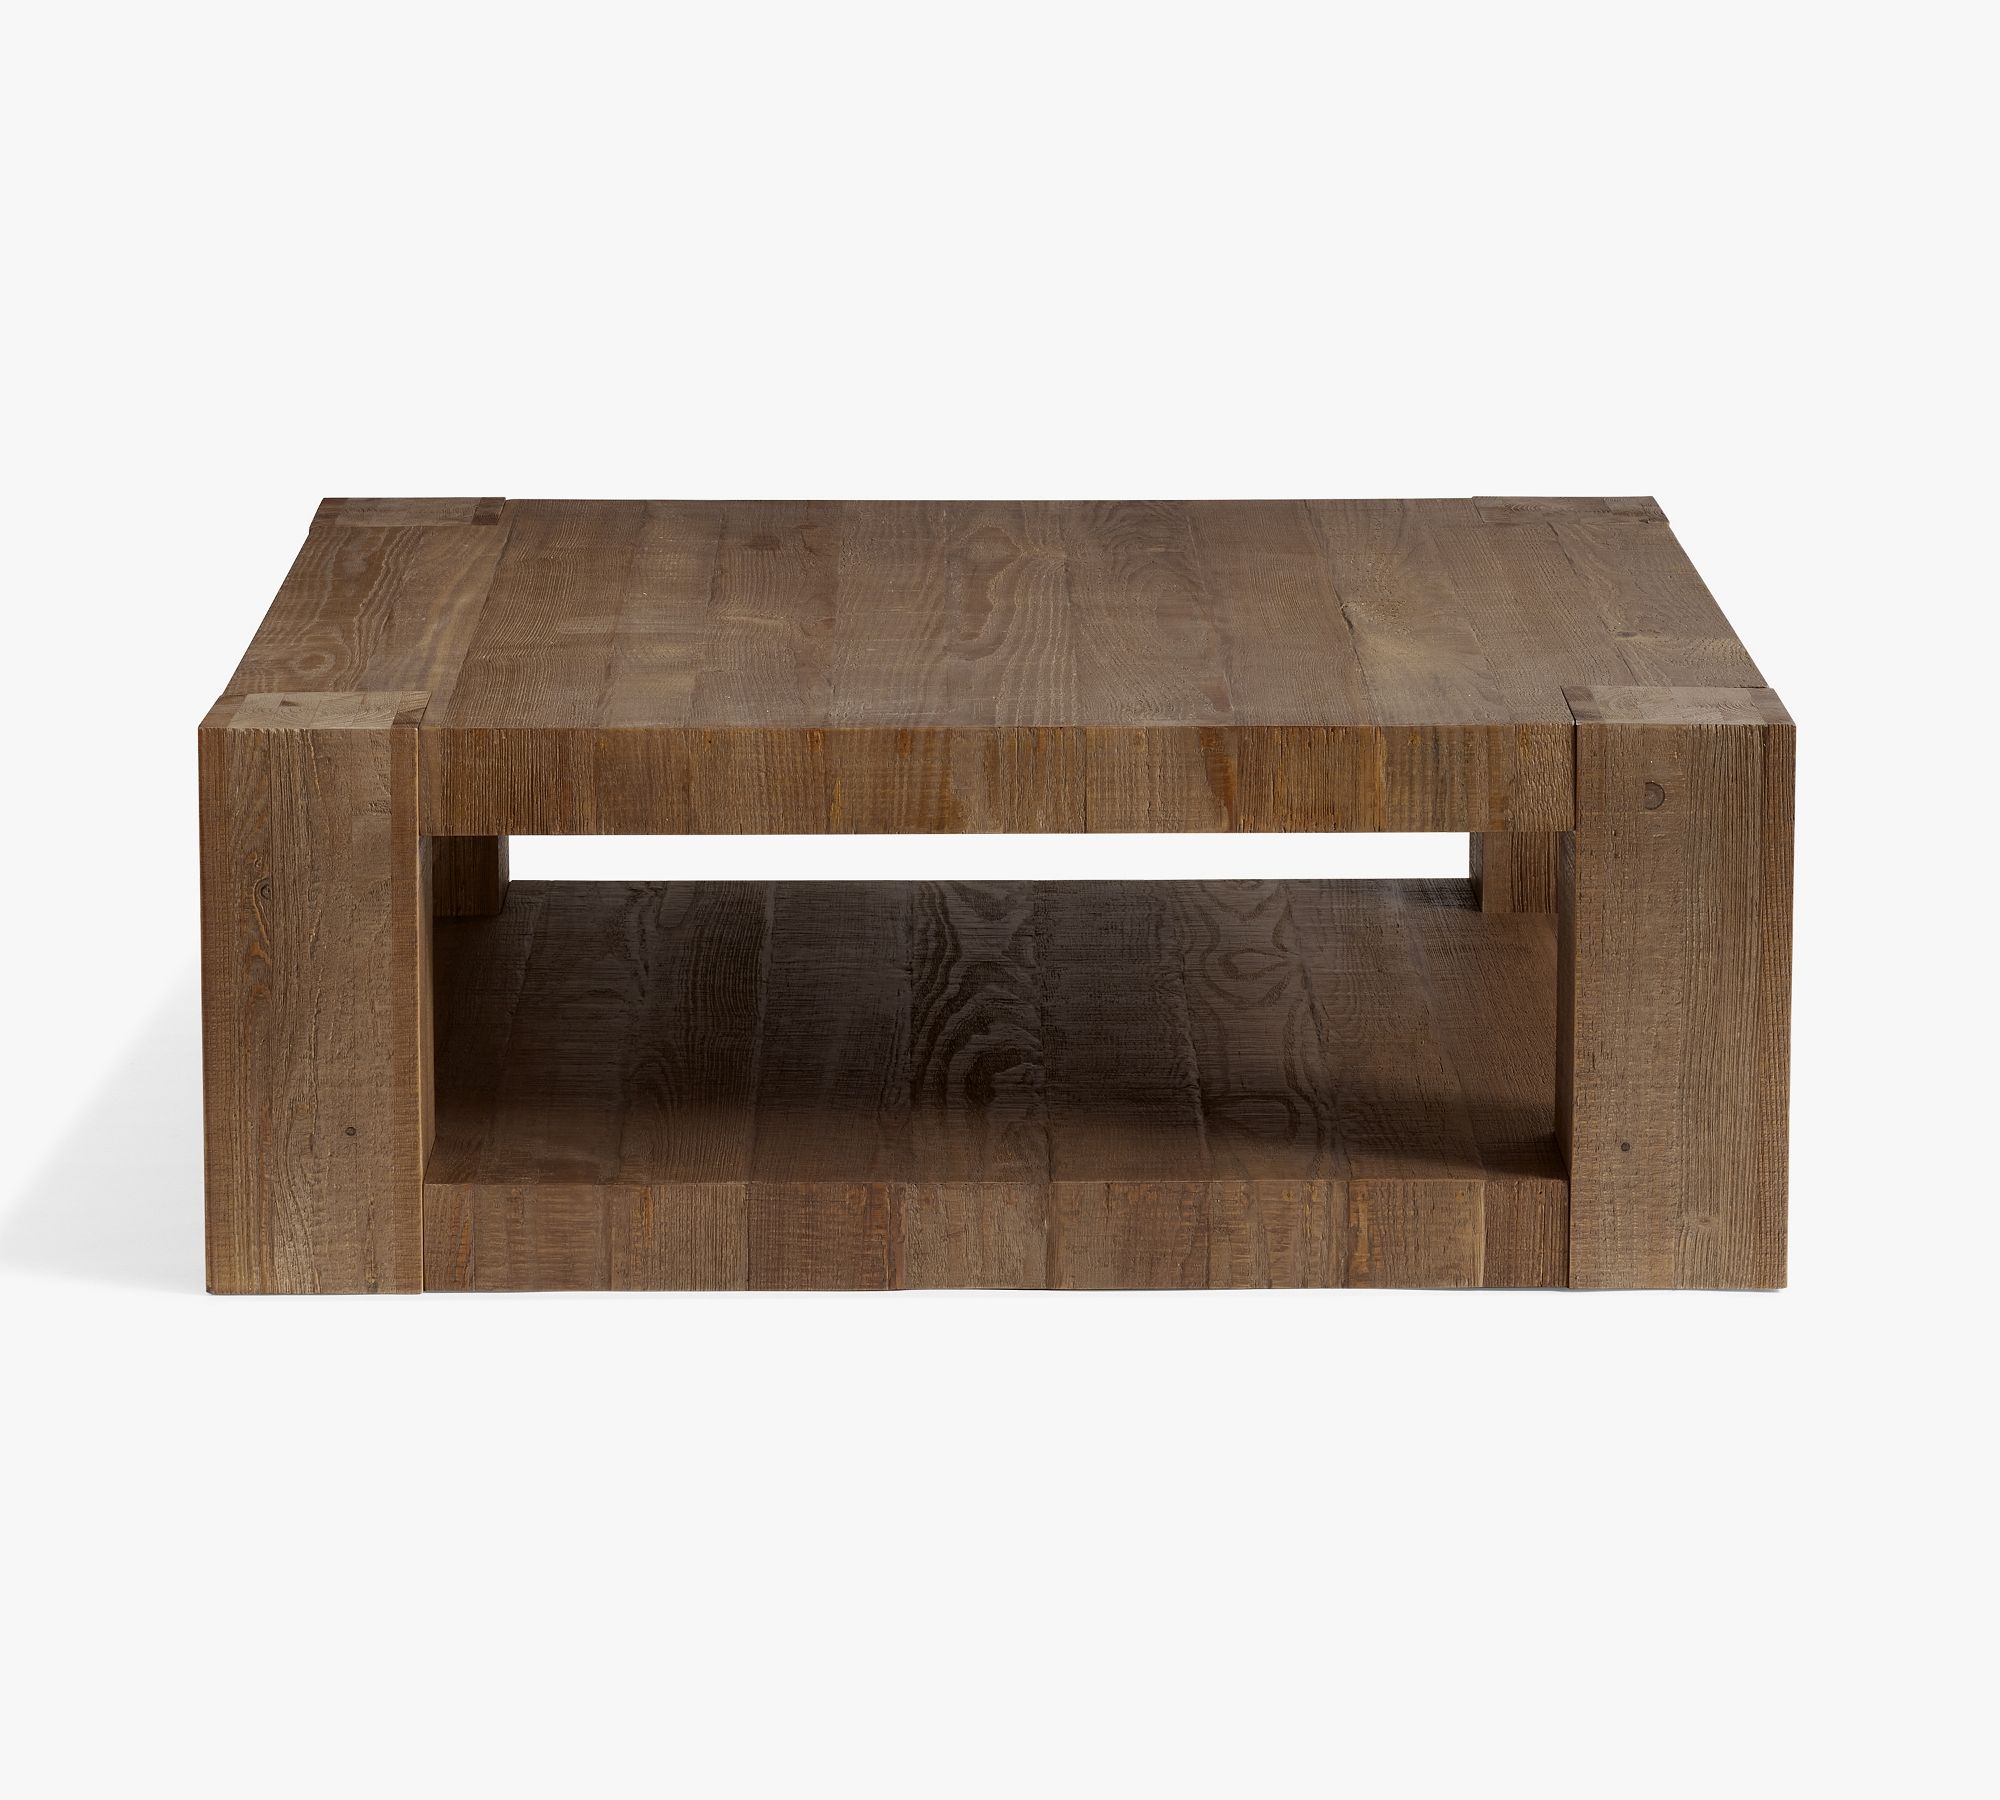 Palisades Square Reclaimed Wood Coffee Table (44")